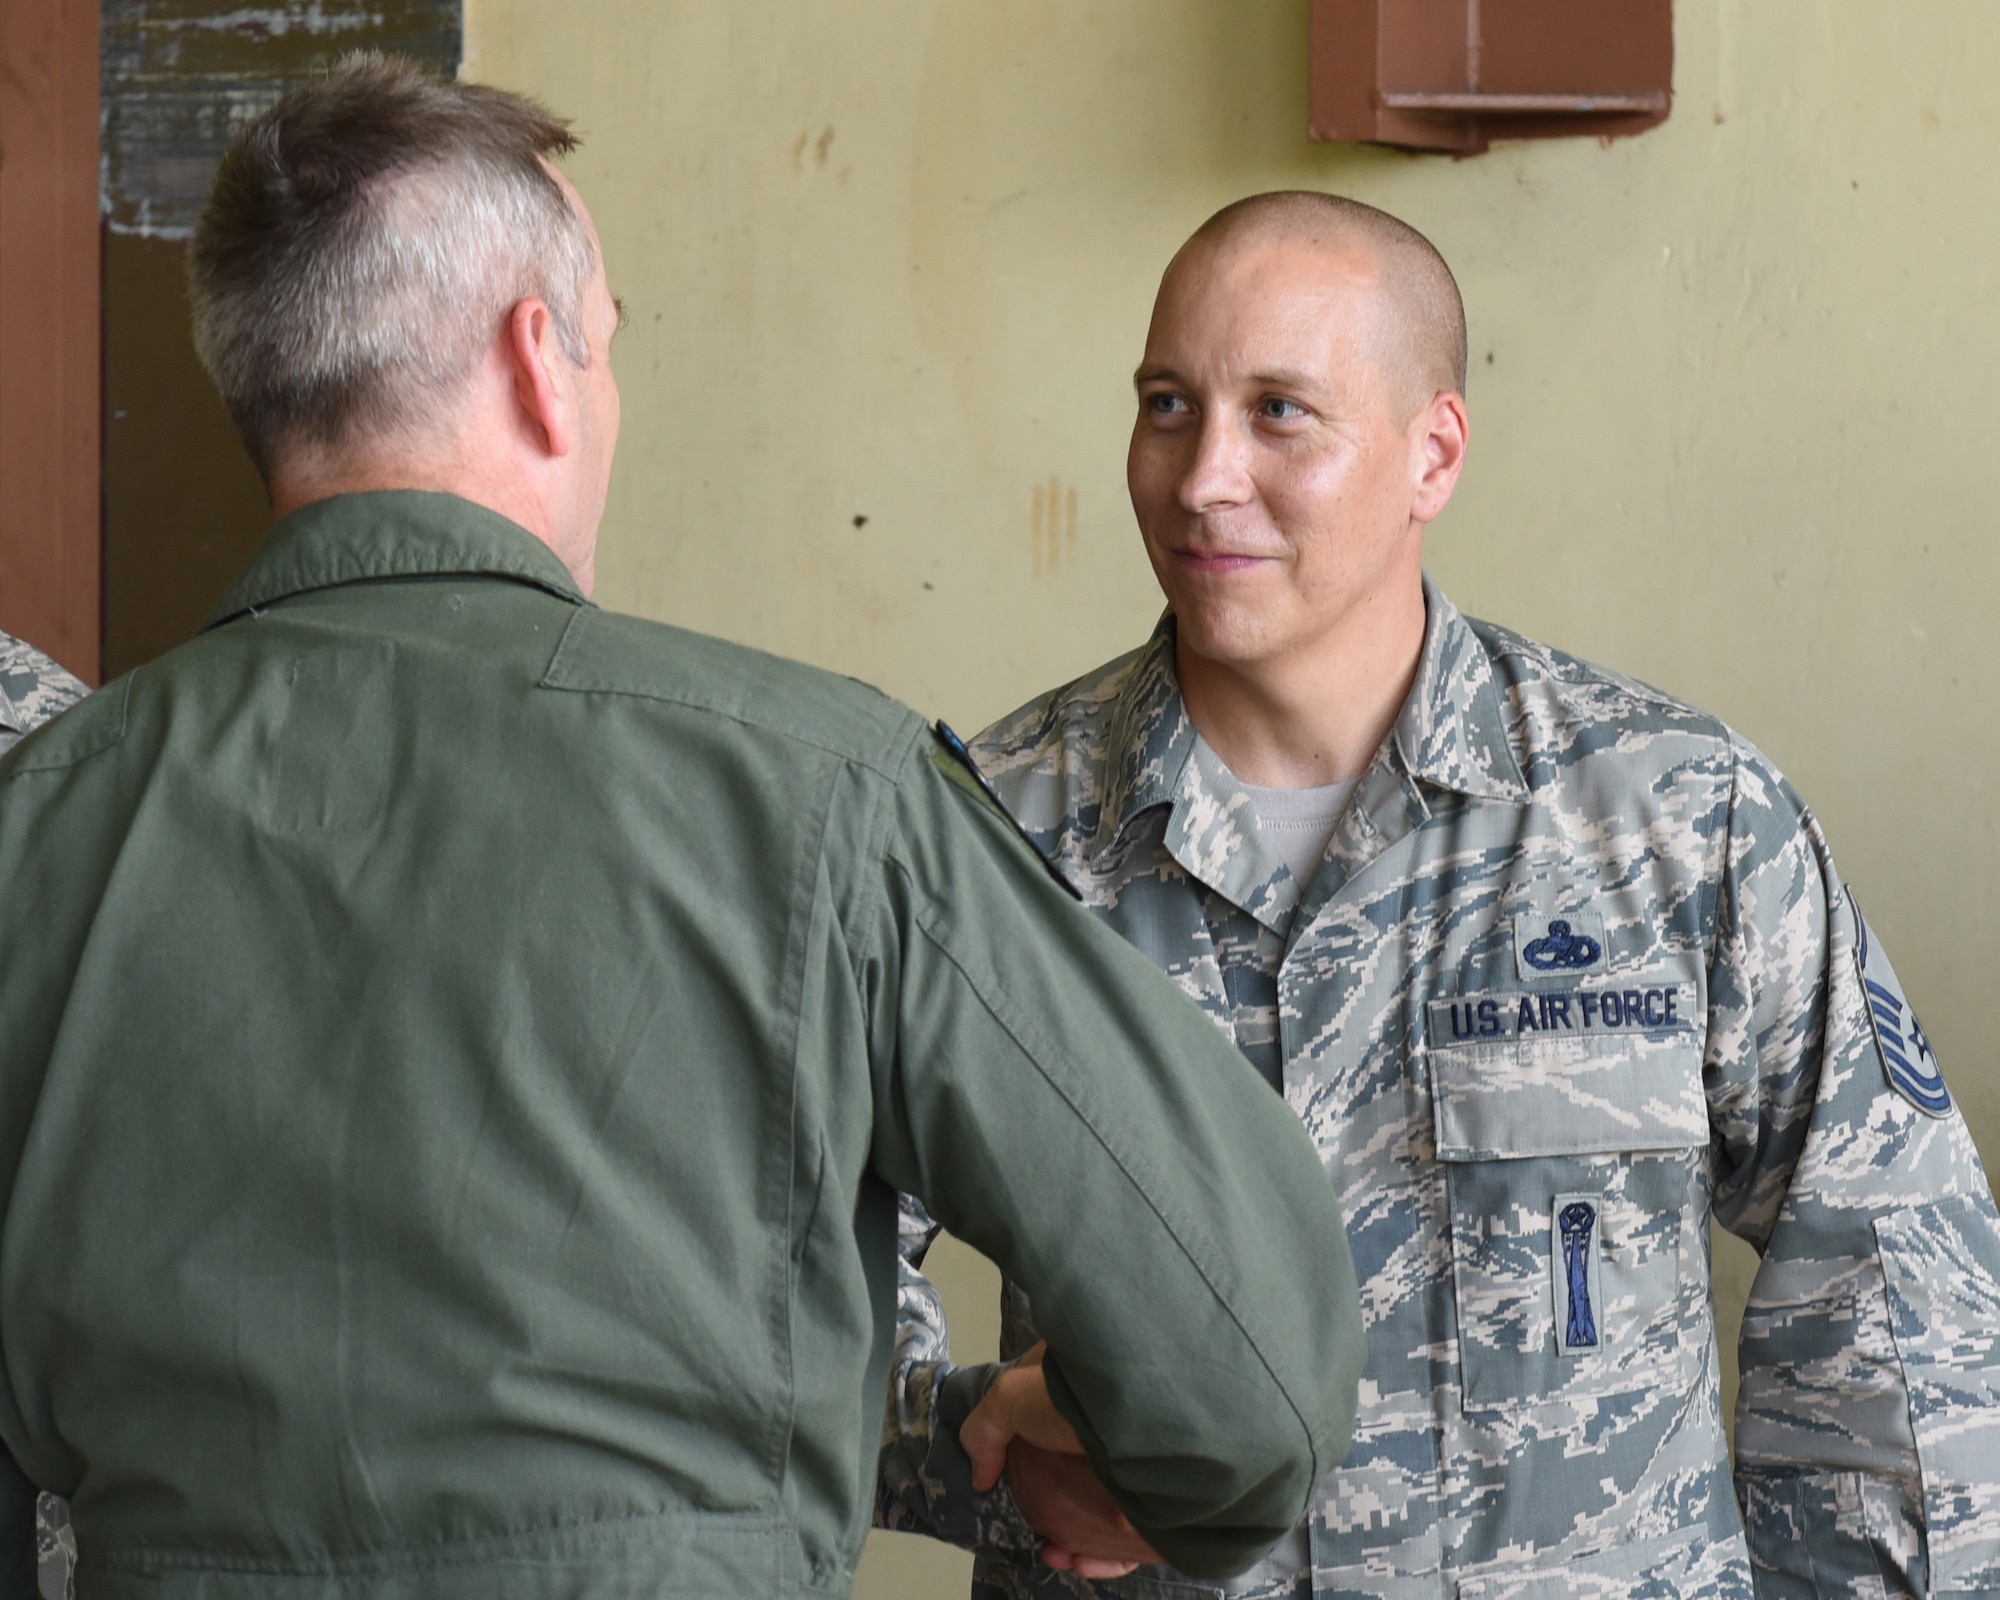 U.S. Air Force Gen. Terrence J. O’Shaughnessy, Pacific Air Forces commander, left, thanks Master Sgt. Aaron M. Williston, a missile maintenance flight chief with the 36th Munitions Squadron, for his hard work and dedication Jan. 31, 2017, at Andersen Air Force Base, Guam. O'Shaughnessy had the opportunity to see firsthand how Airmen at Andersen AFB execute U.S. Pacific Command’s continuous bomber presence mission. The Airmen who fly and support the CBP mission, provide a significant capability that enables U.S. readiness and commitment to deterrence, provides assurances to our allies, and strengthens regional security and stability in the Indo-Asia-Pacific region. (U.S. Air Force photo by Airman 1st Class Jacob Skovo)
